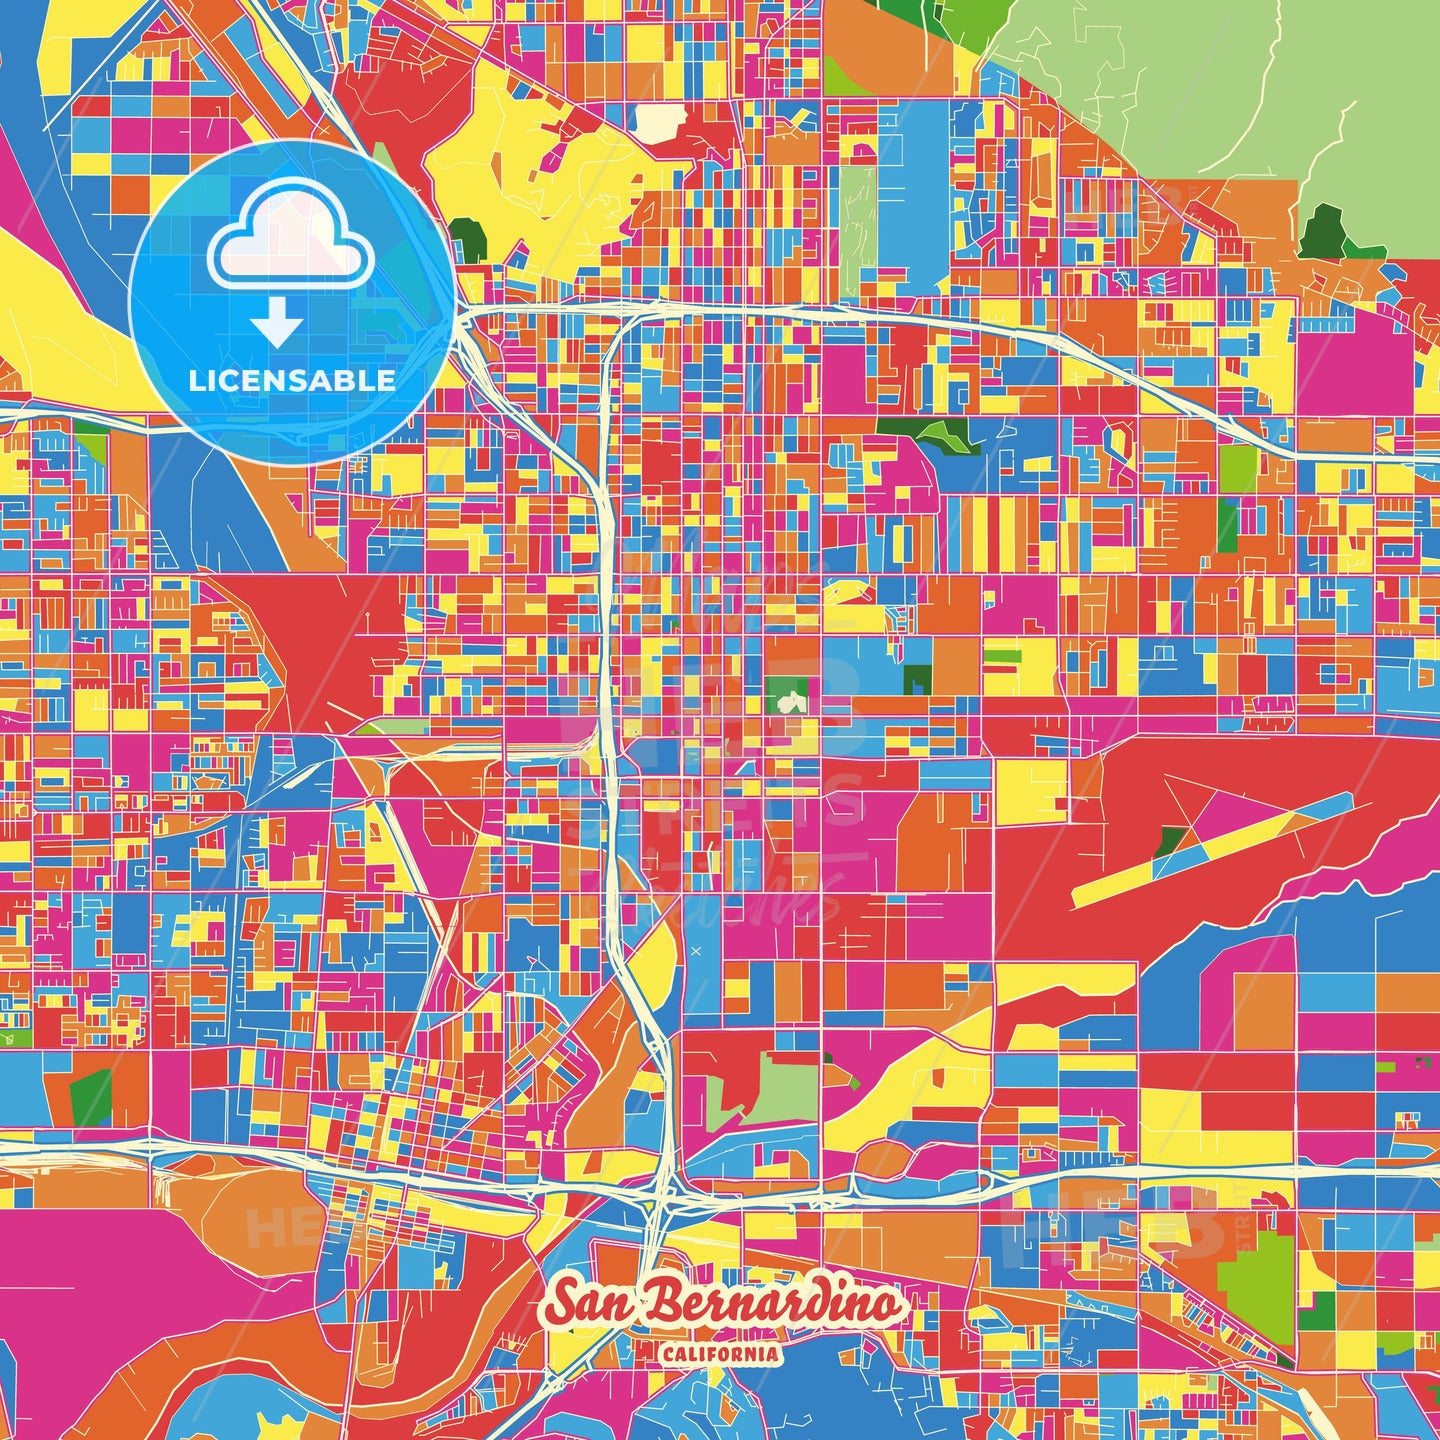 San Bernardino, United States Crazy Colorful Street Map Poster Template - HEBSTREITS Sketches